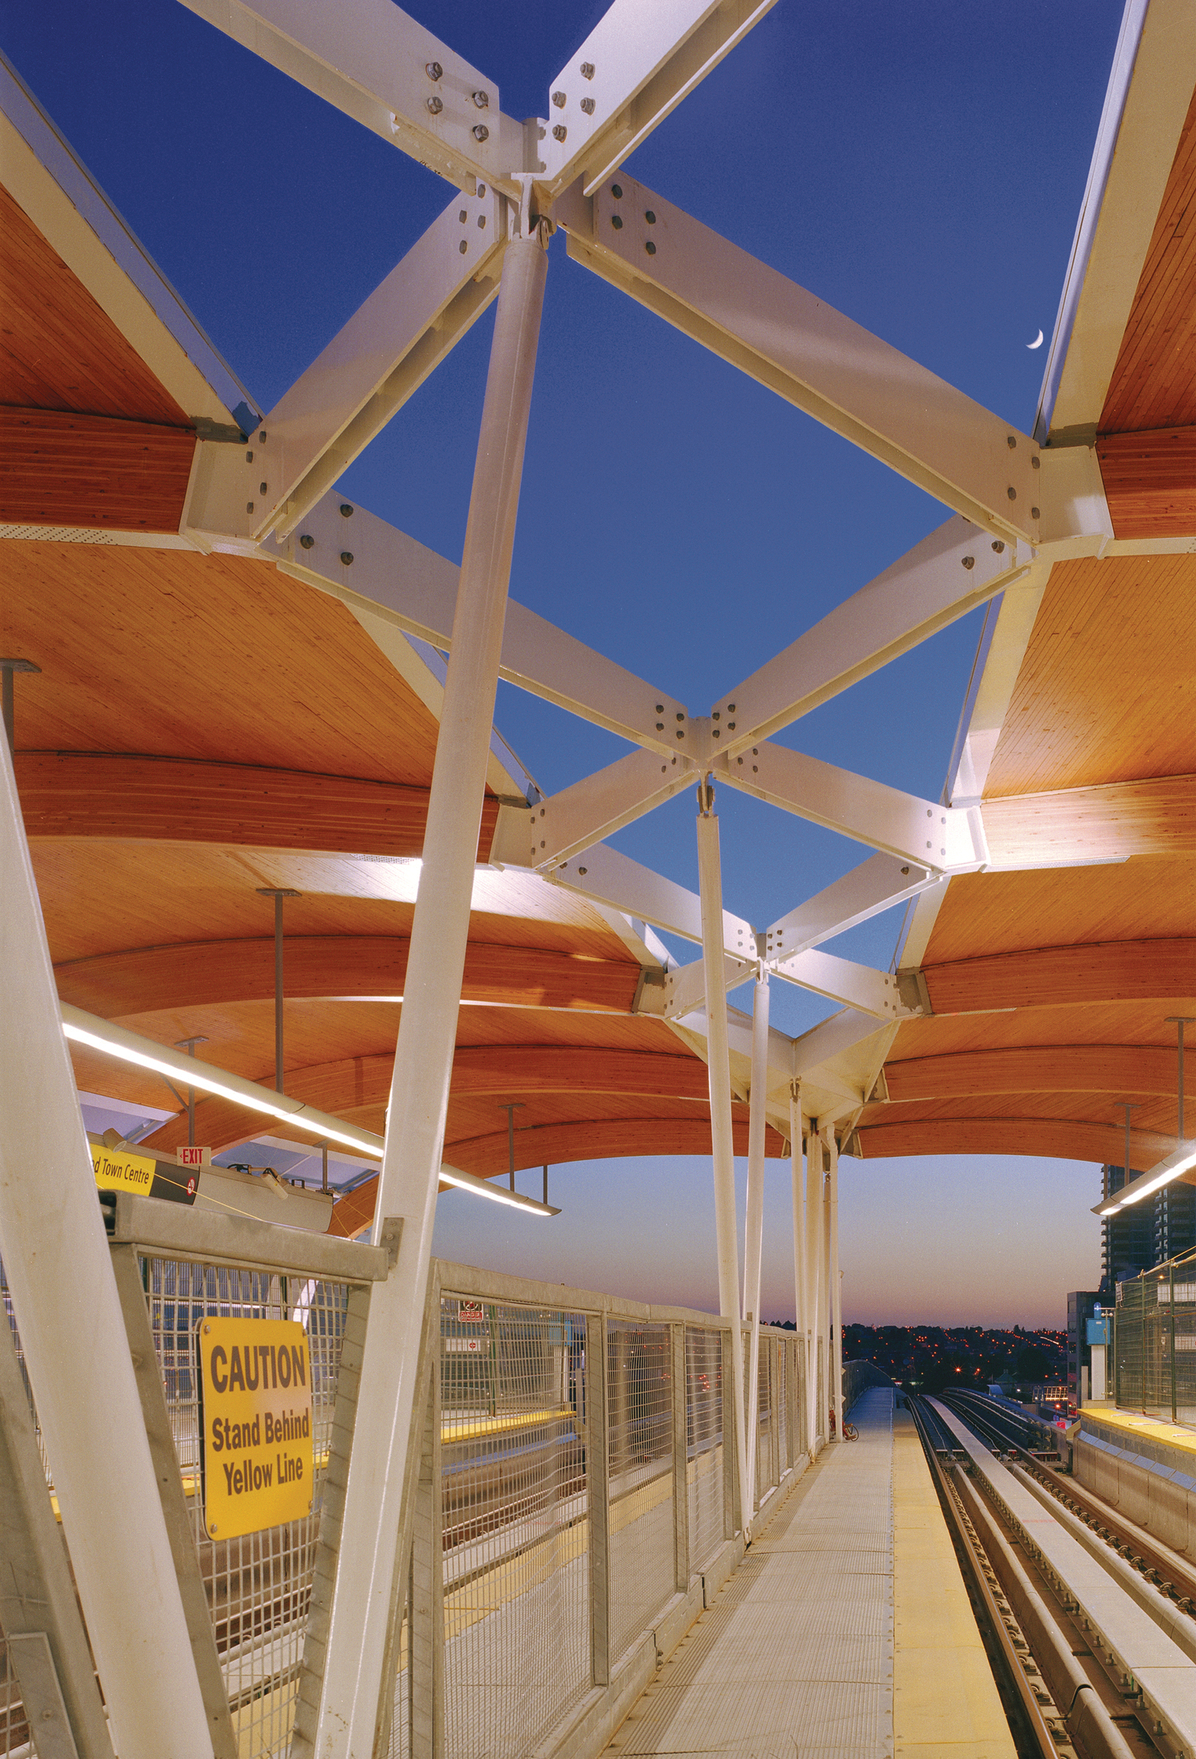 Large arching nail laminated timber (NLT) beams supporting a wooden ceiling are prominent features in this interior view of the City of Burnaby's Brentwood transit station